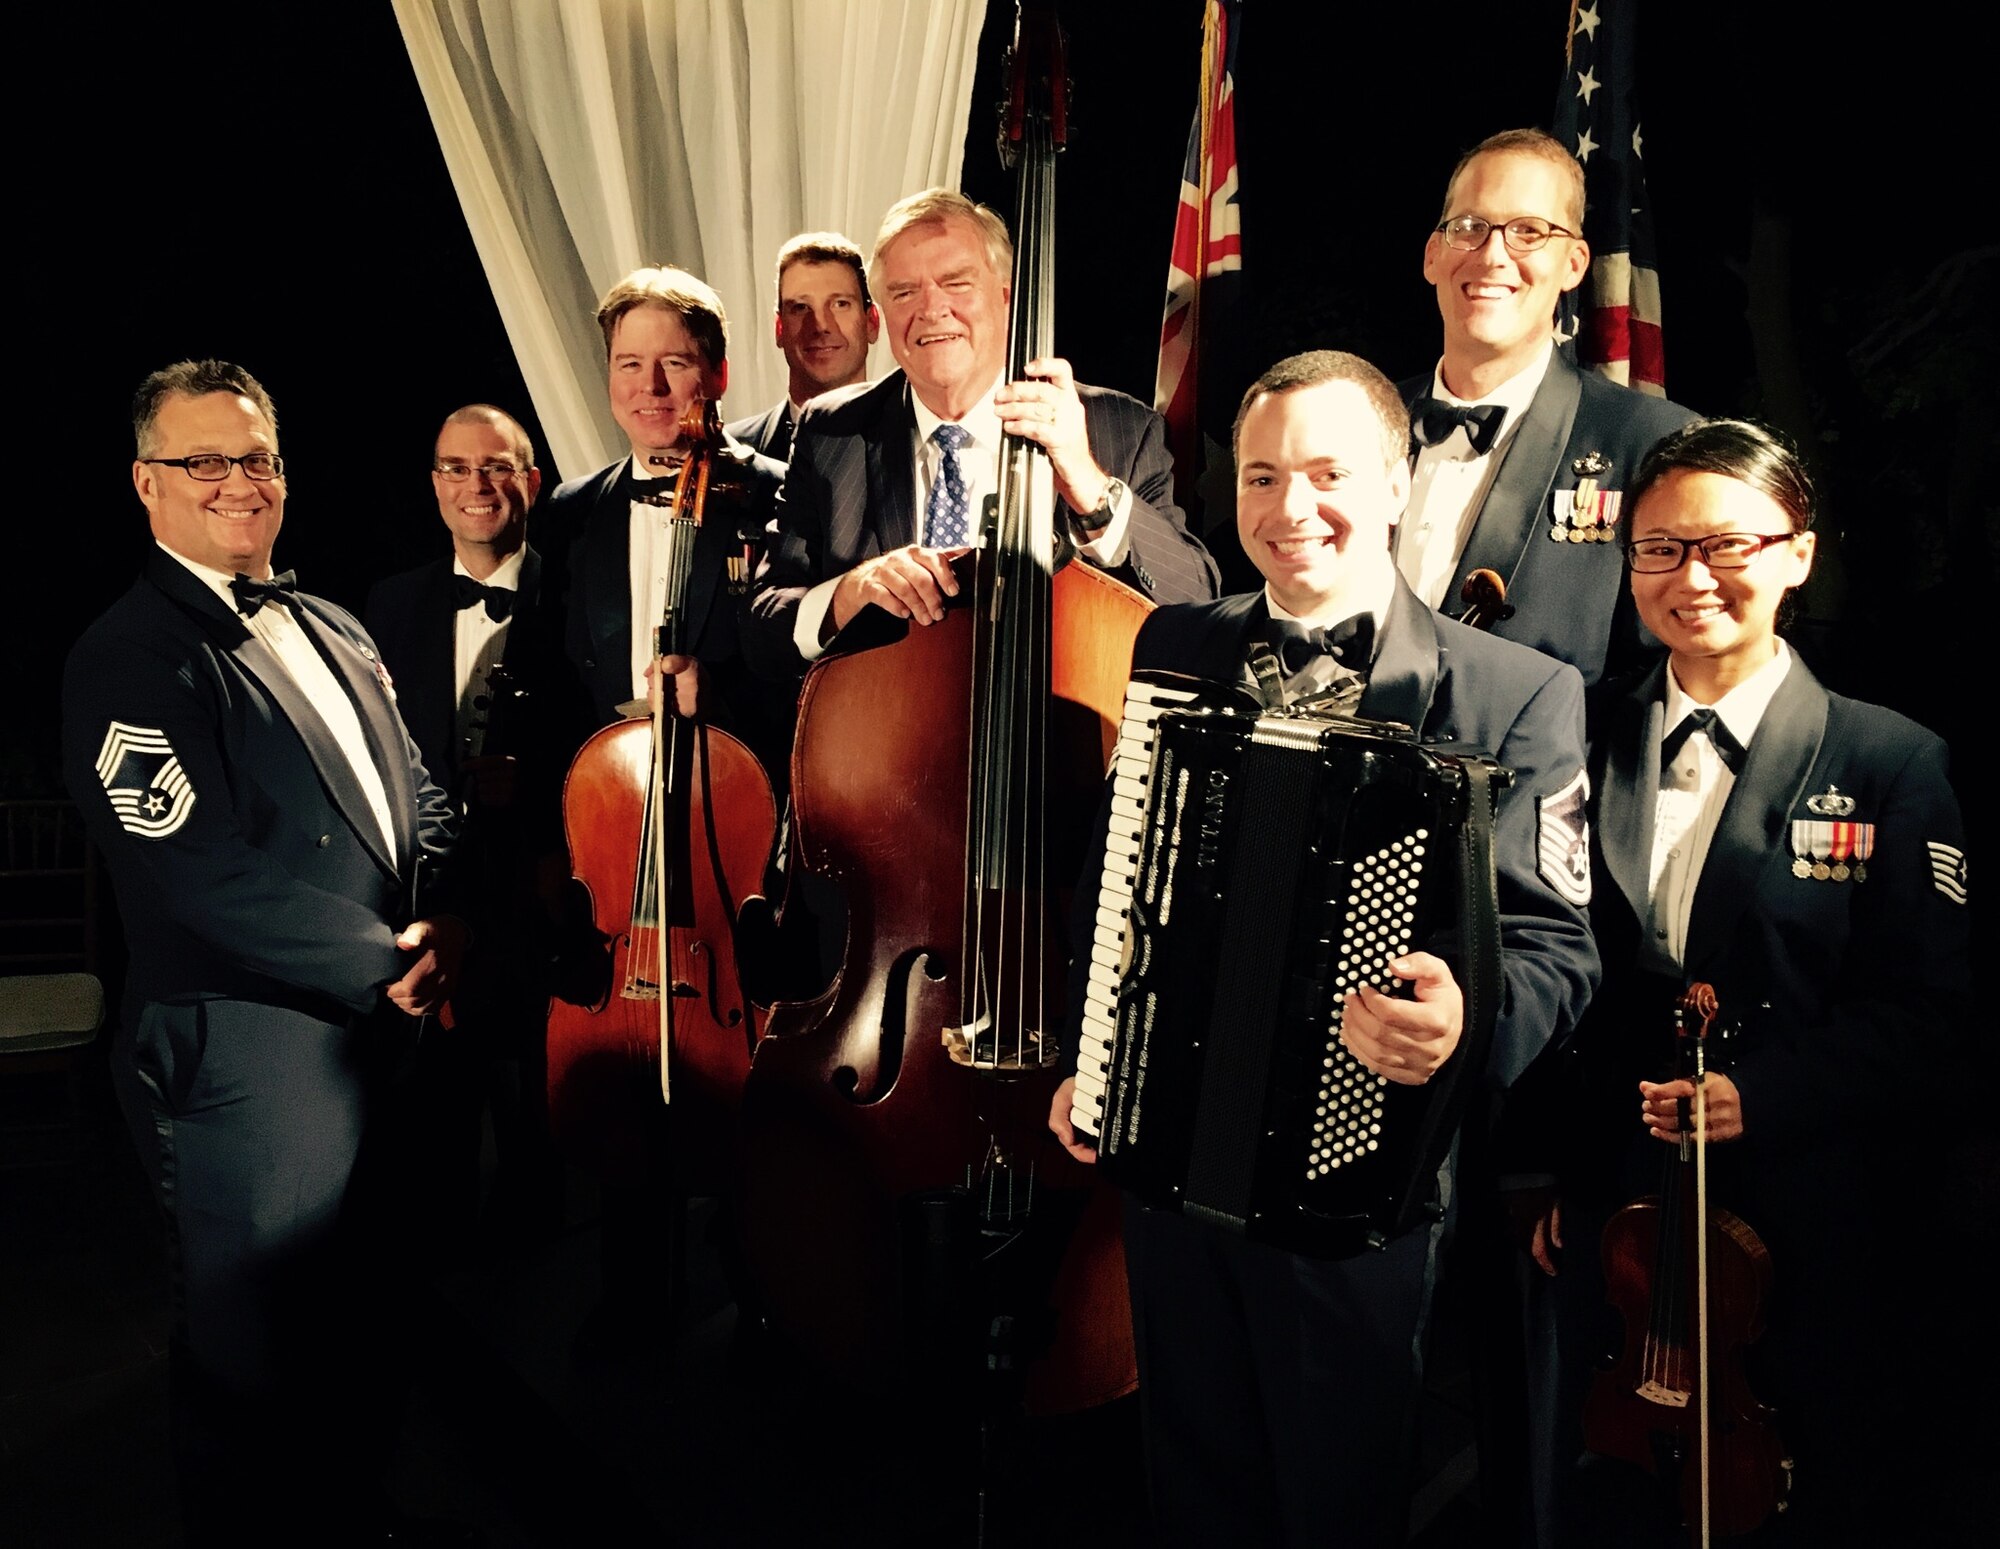 Members of the Air Force Strings with the Honorable Kim Beazley, Australian
Ambassador to the U.S. The Strings were on hand recently to help celebrate
75 years of bilateral relations between the U.S. and Australia. (Photo
courtesy Master Sgt. Will Hurd, released)
